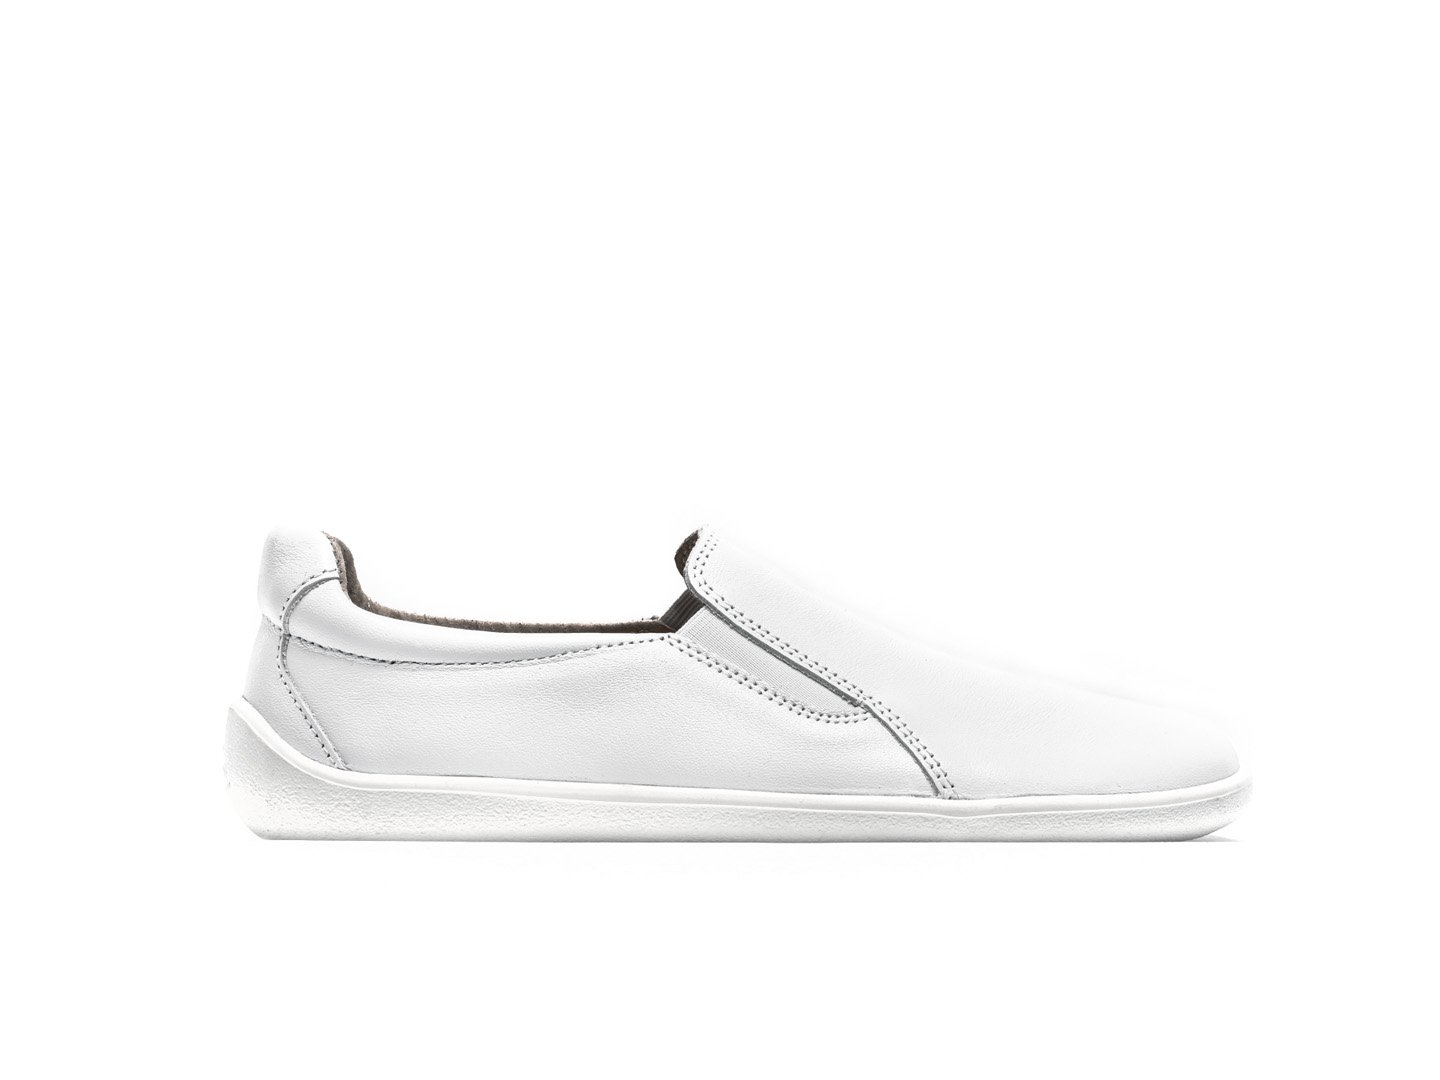 A Big List of Slip-On Barefoot Shoes